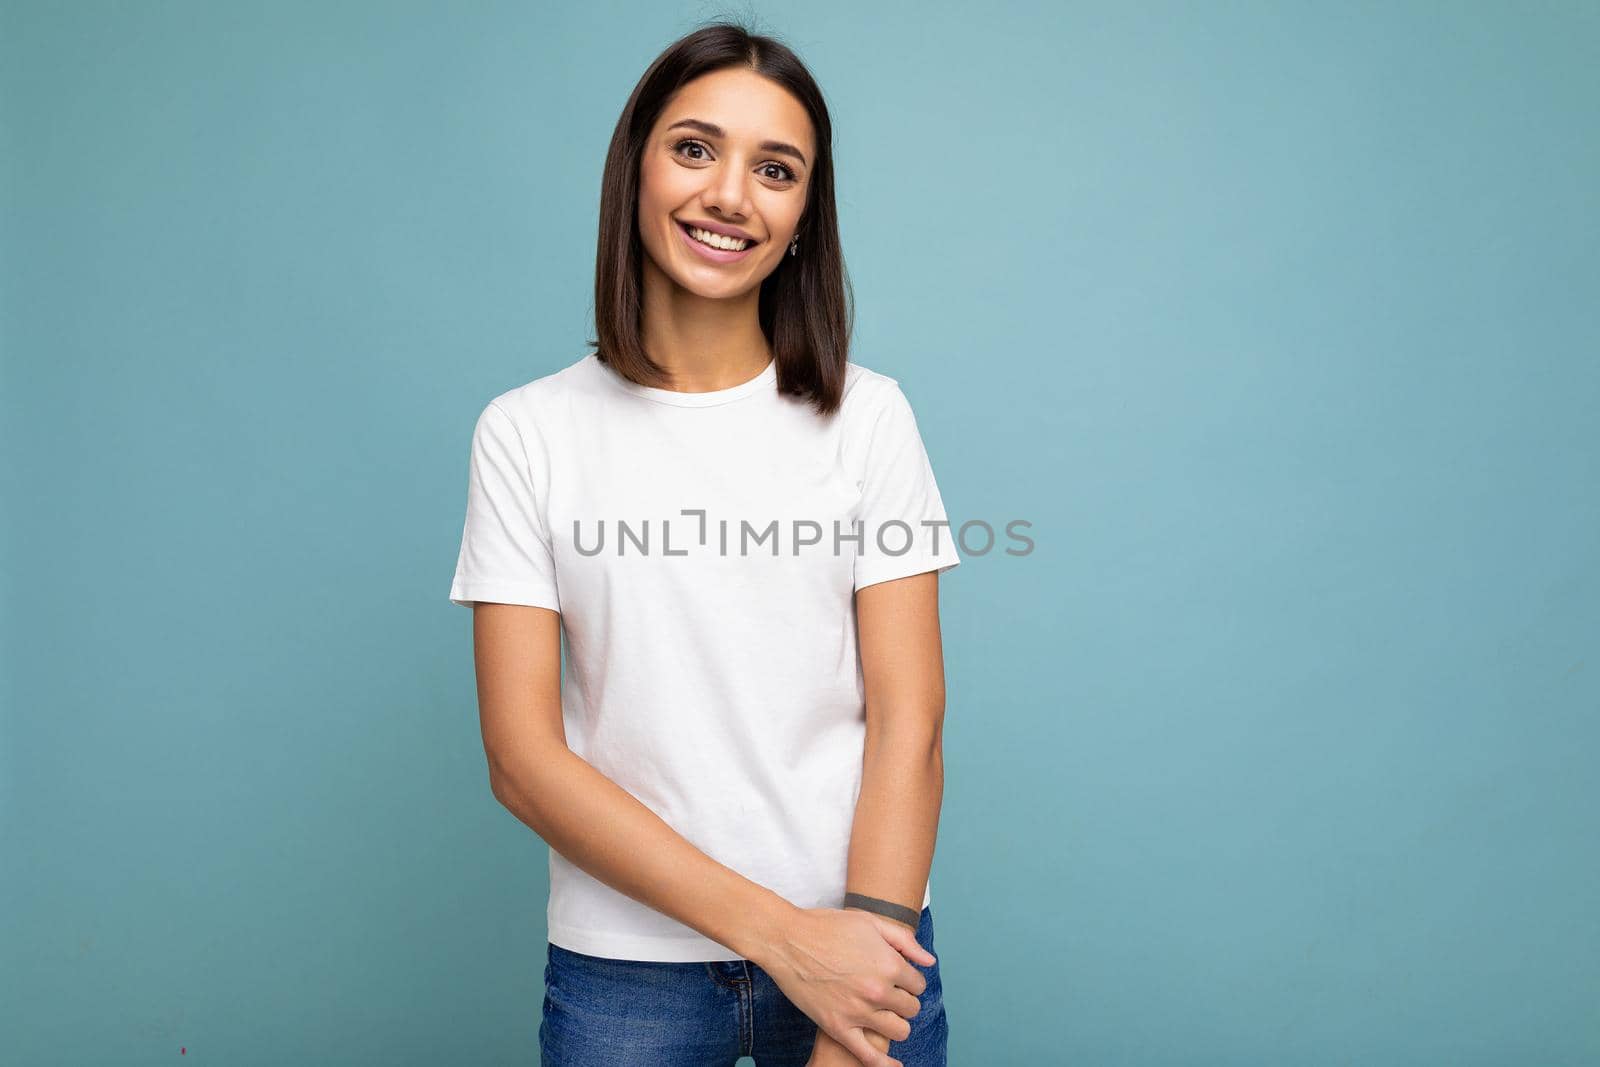 Portrait of positive cheerful fashionable smiling young brunette woman in casual white t-shirt for mockup isolated on blue background with copy space.